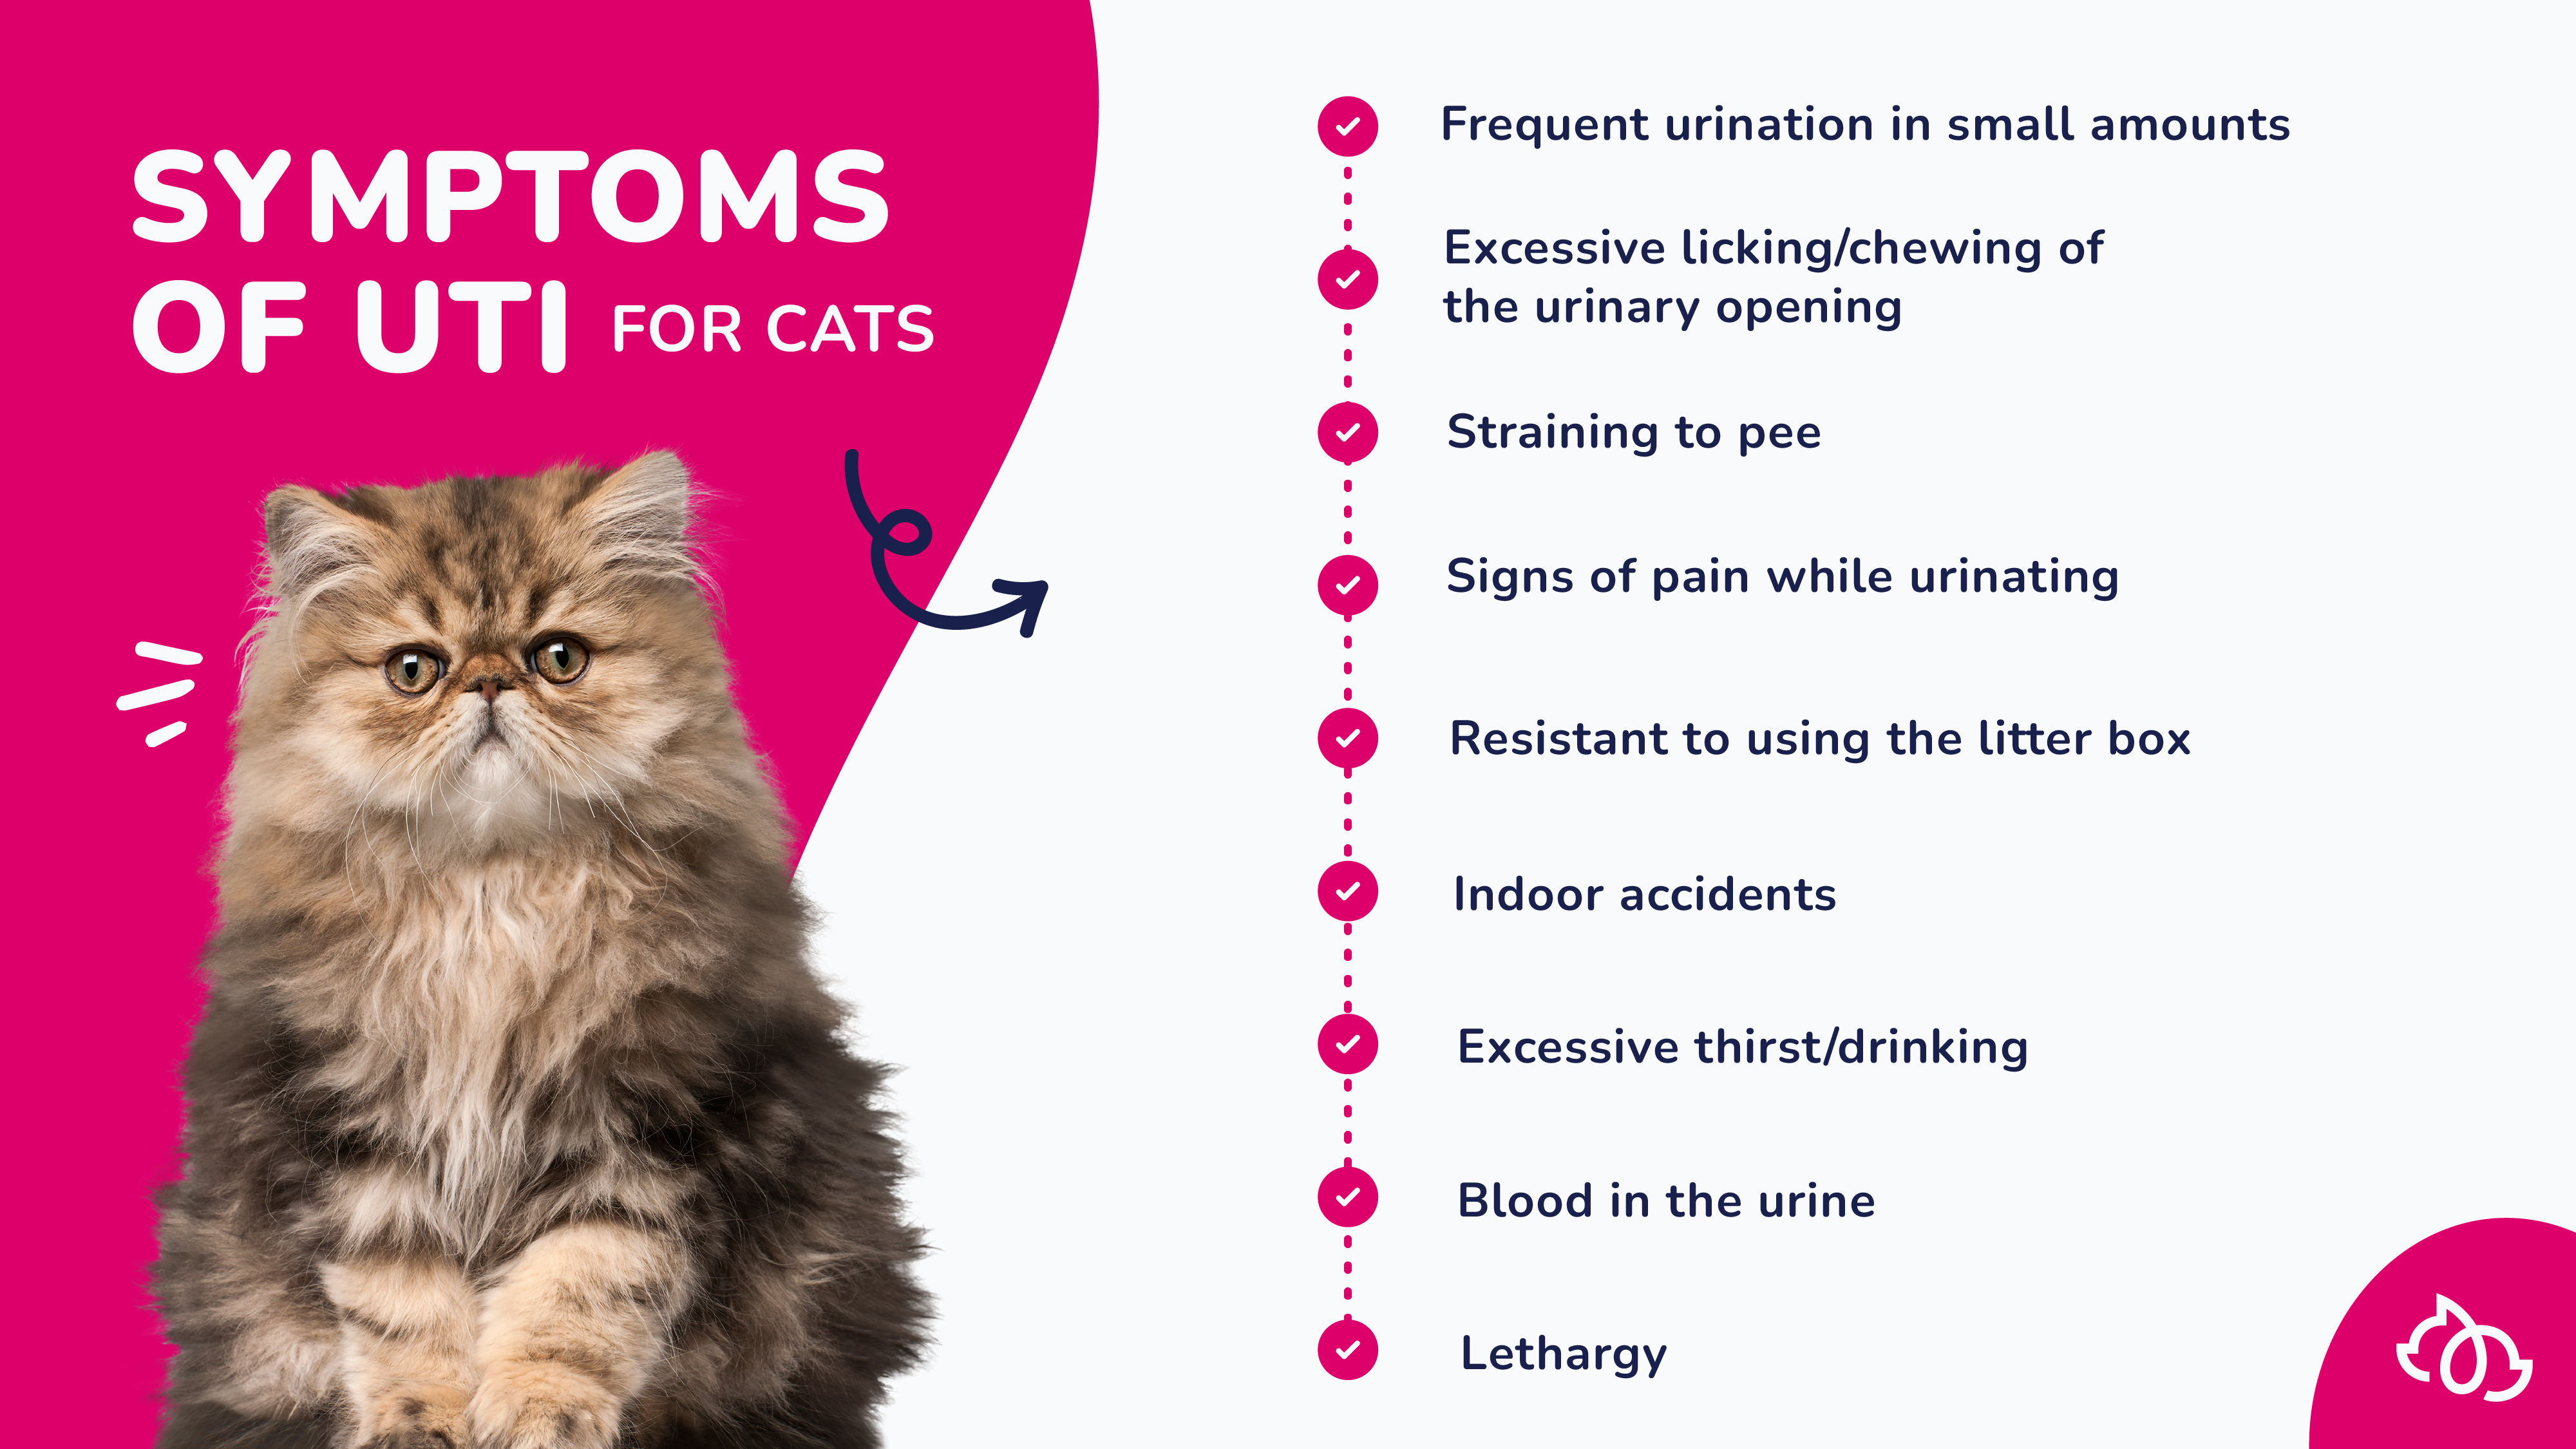 The signs and symptoms of UTIs in cats infographic.